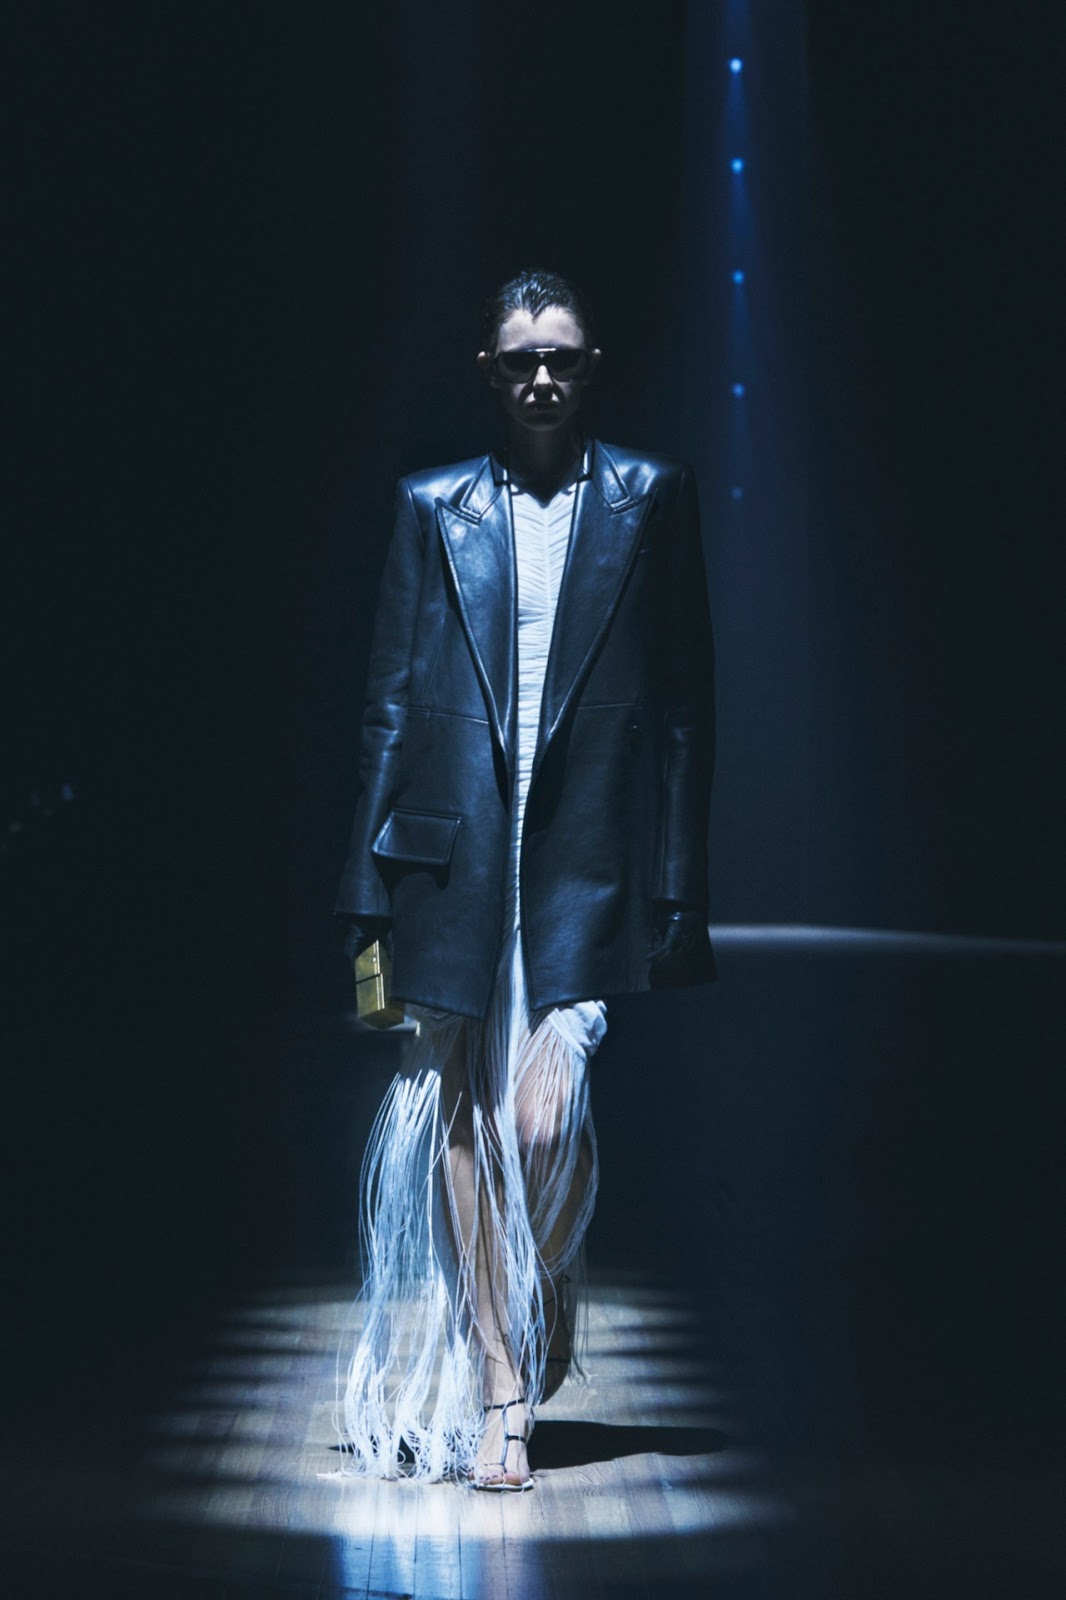 Woman with dark brown hair in sleek bun wearing aviator sunglasses, an oversized black leather blazer, and a beige maxidress with fringe carrying a gold metal clutch walking on wooden floorboards under a spotlight